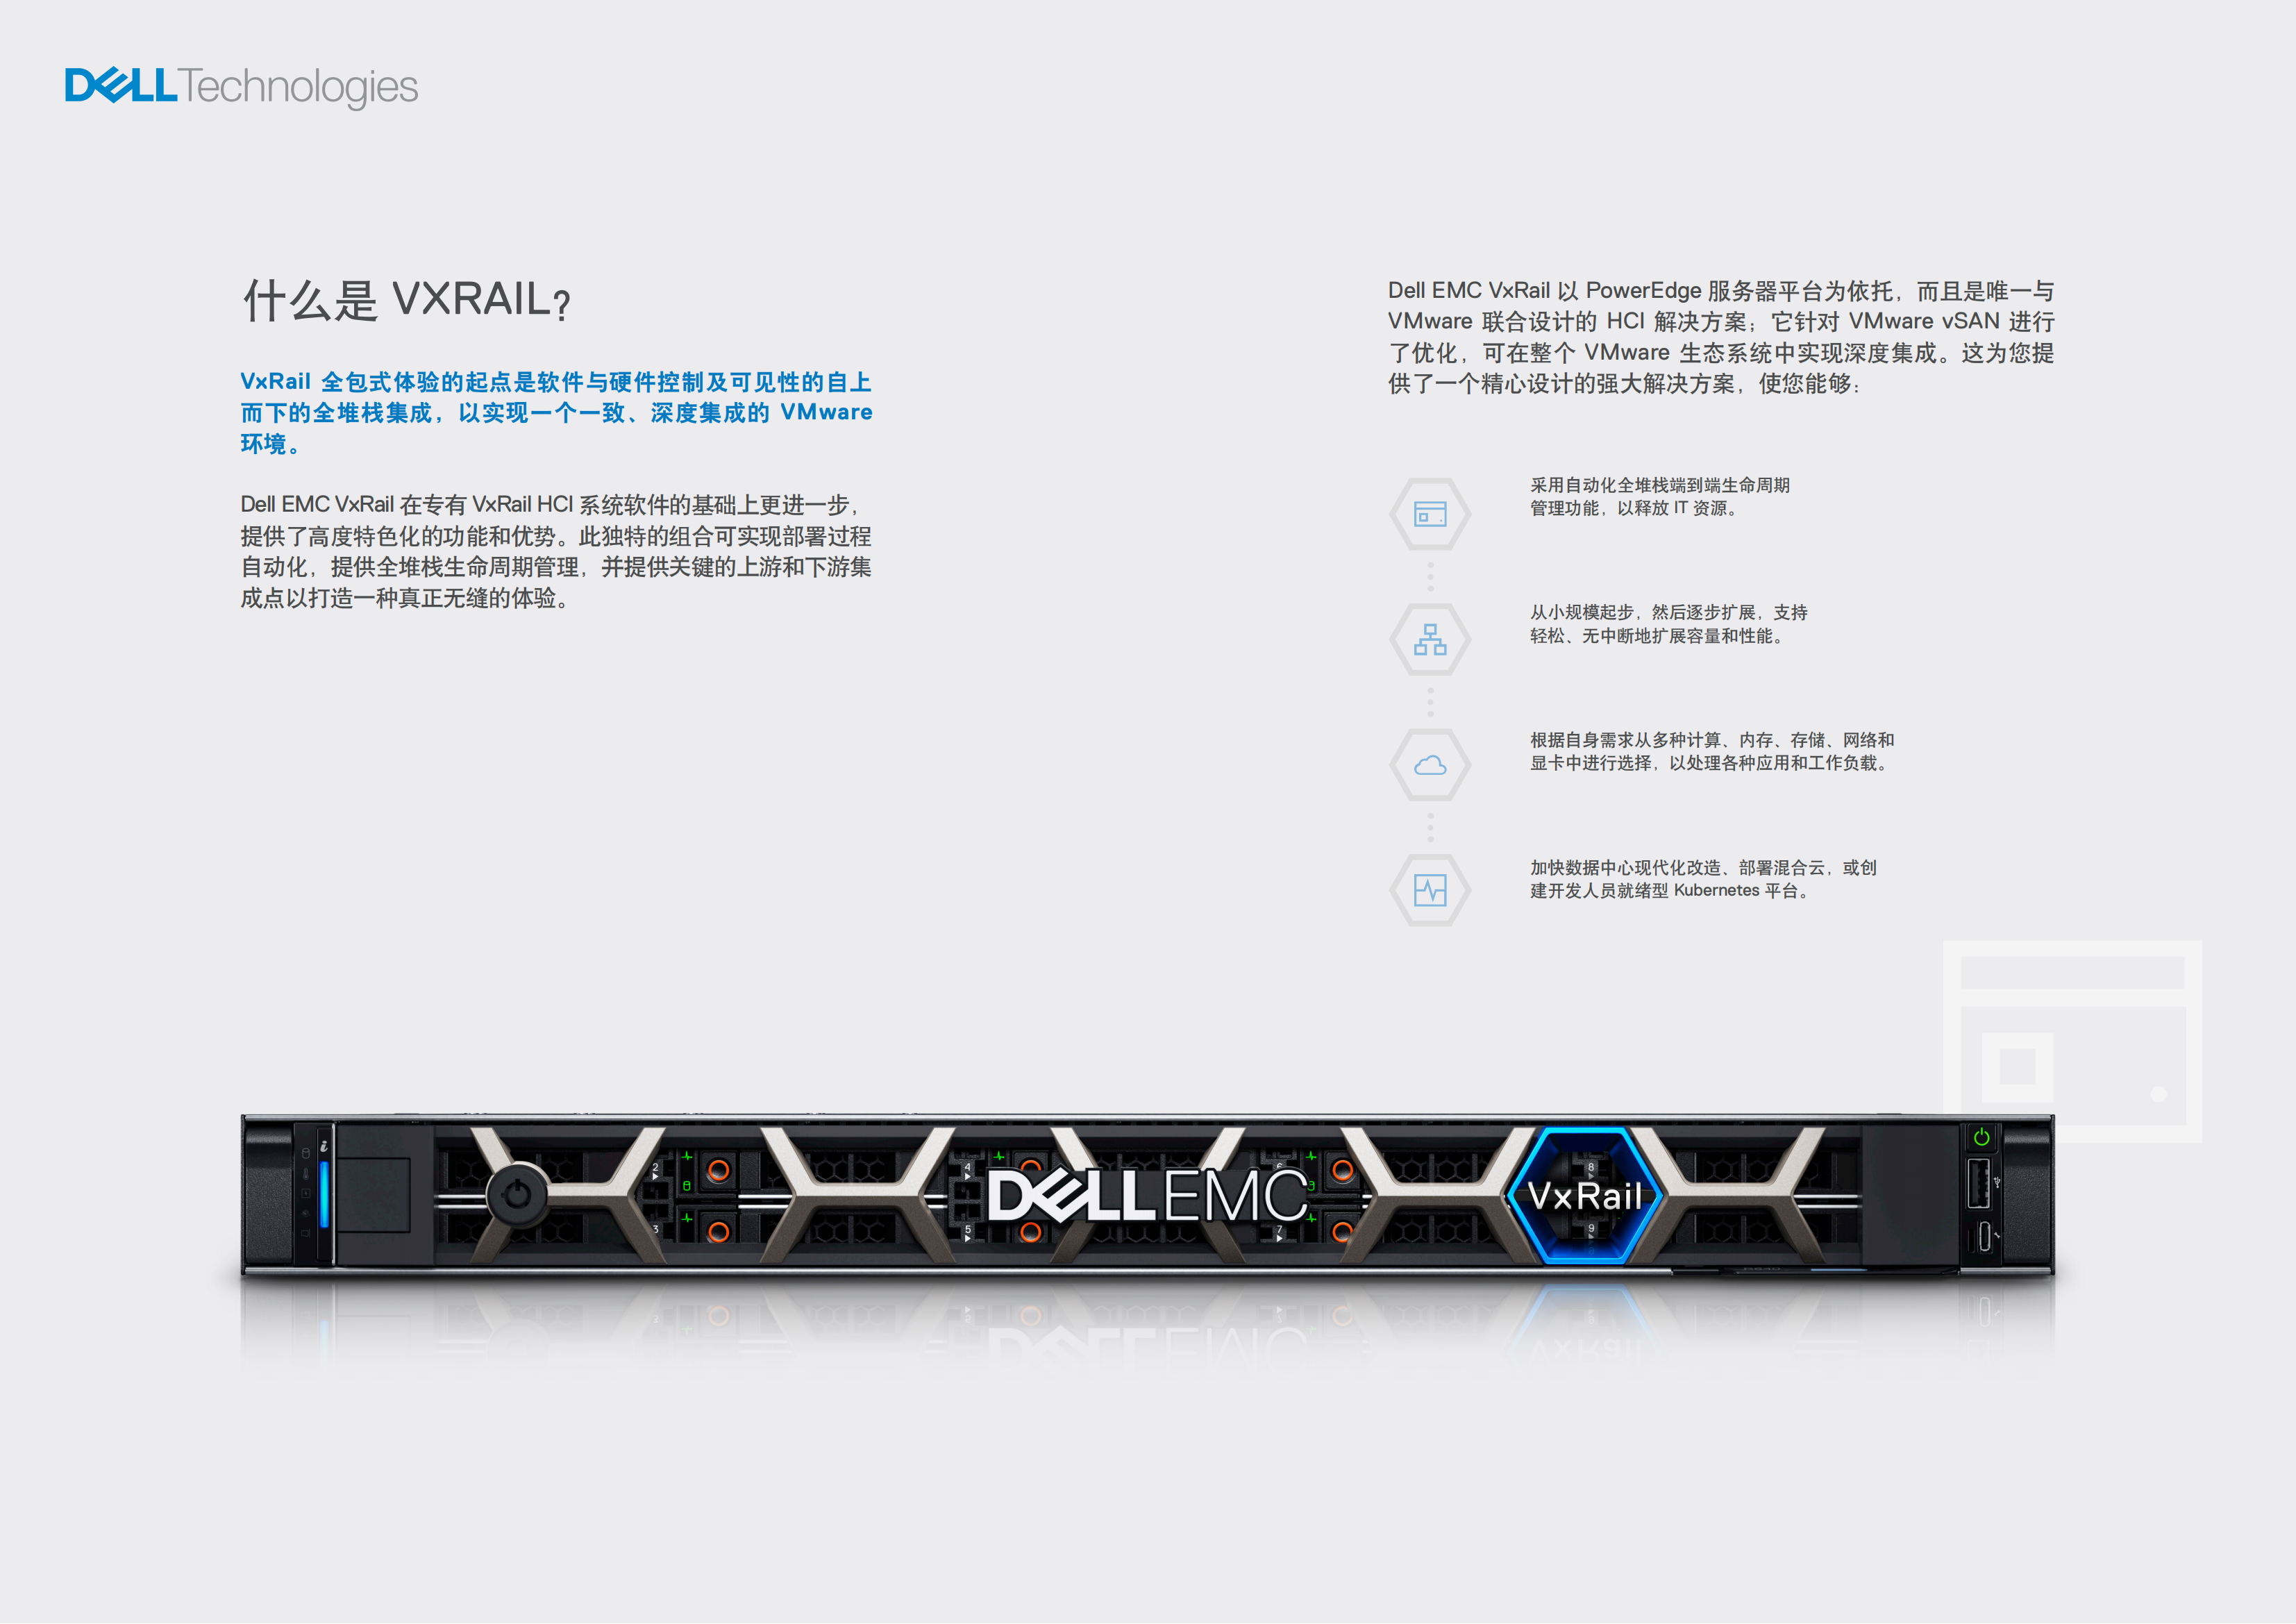 vxrail-customer-brochure-modernize-your-it-operations-with-dell-emc-vxrail(2)_03.png